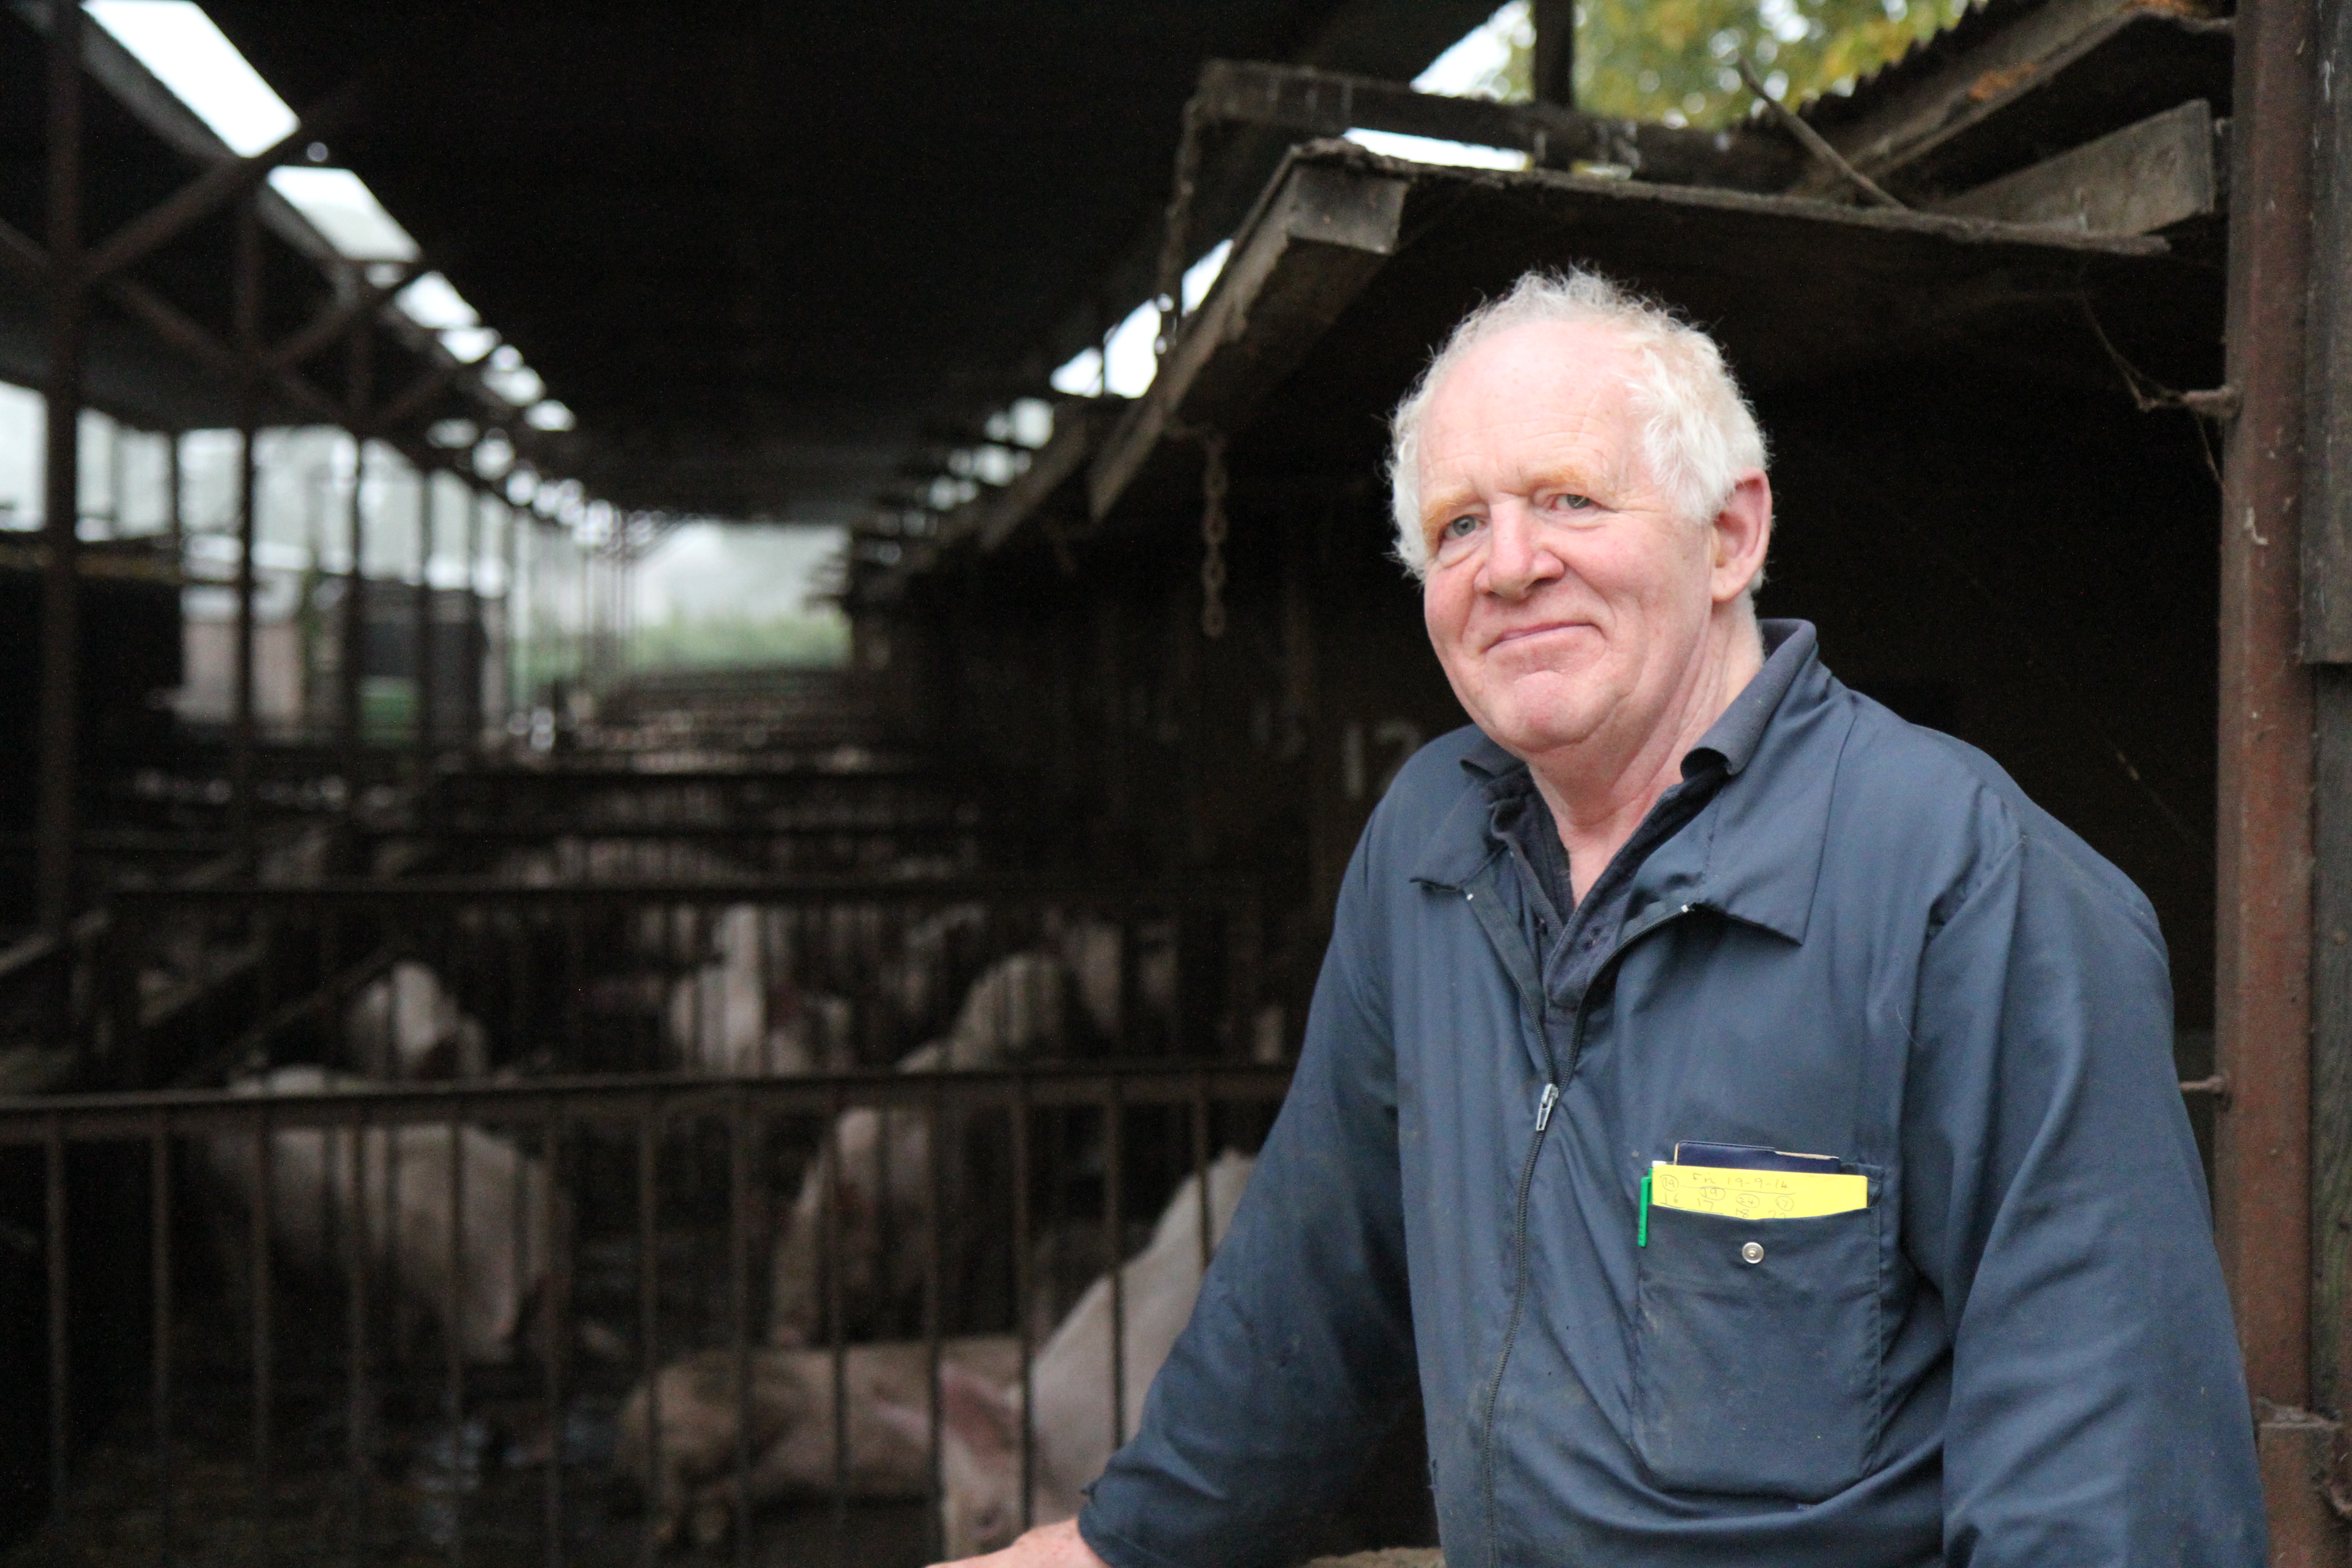 Peter Woodhall runs a 240-sow unit in West Shropshire and says coccidiosis prevention has significantly boosted the performance of his herd